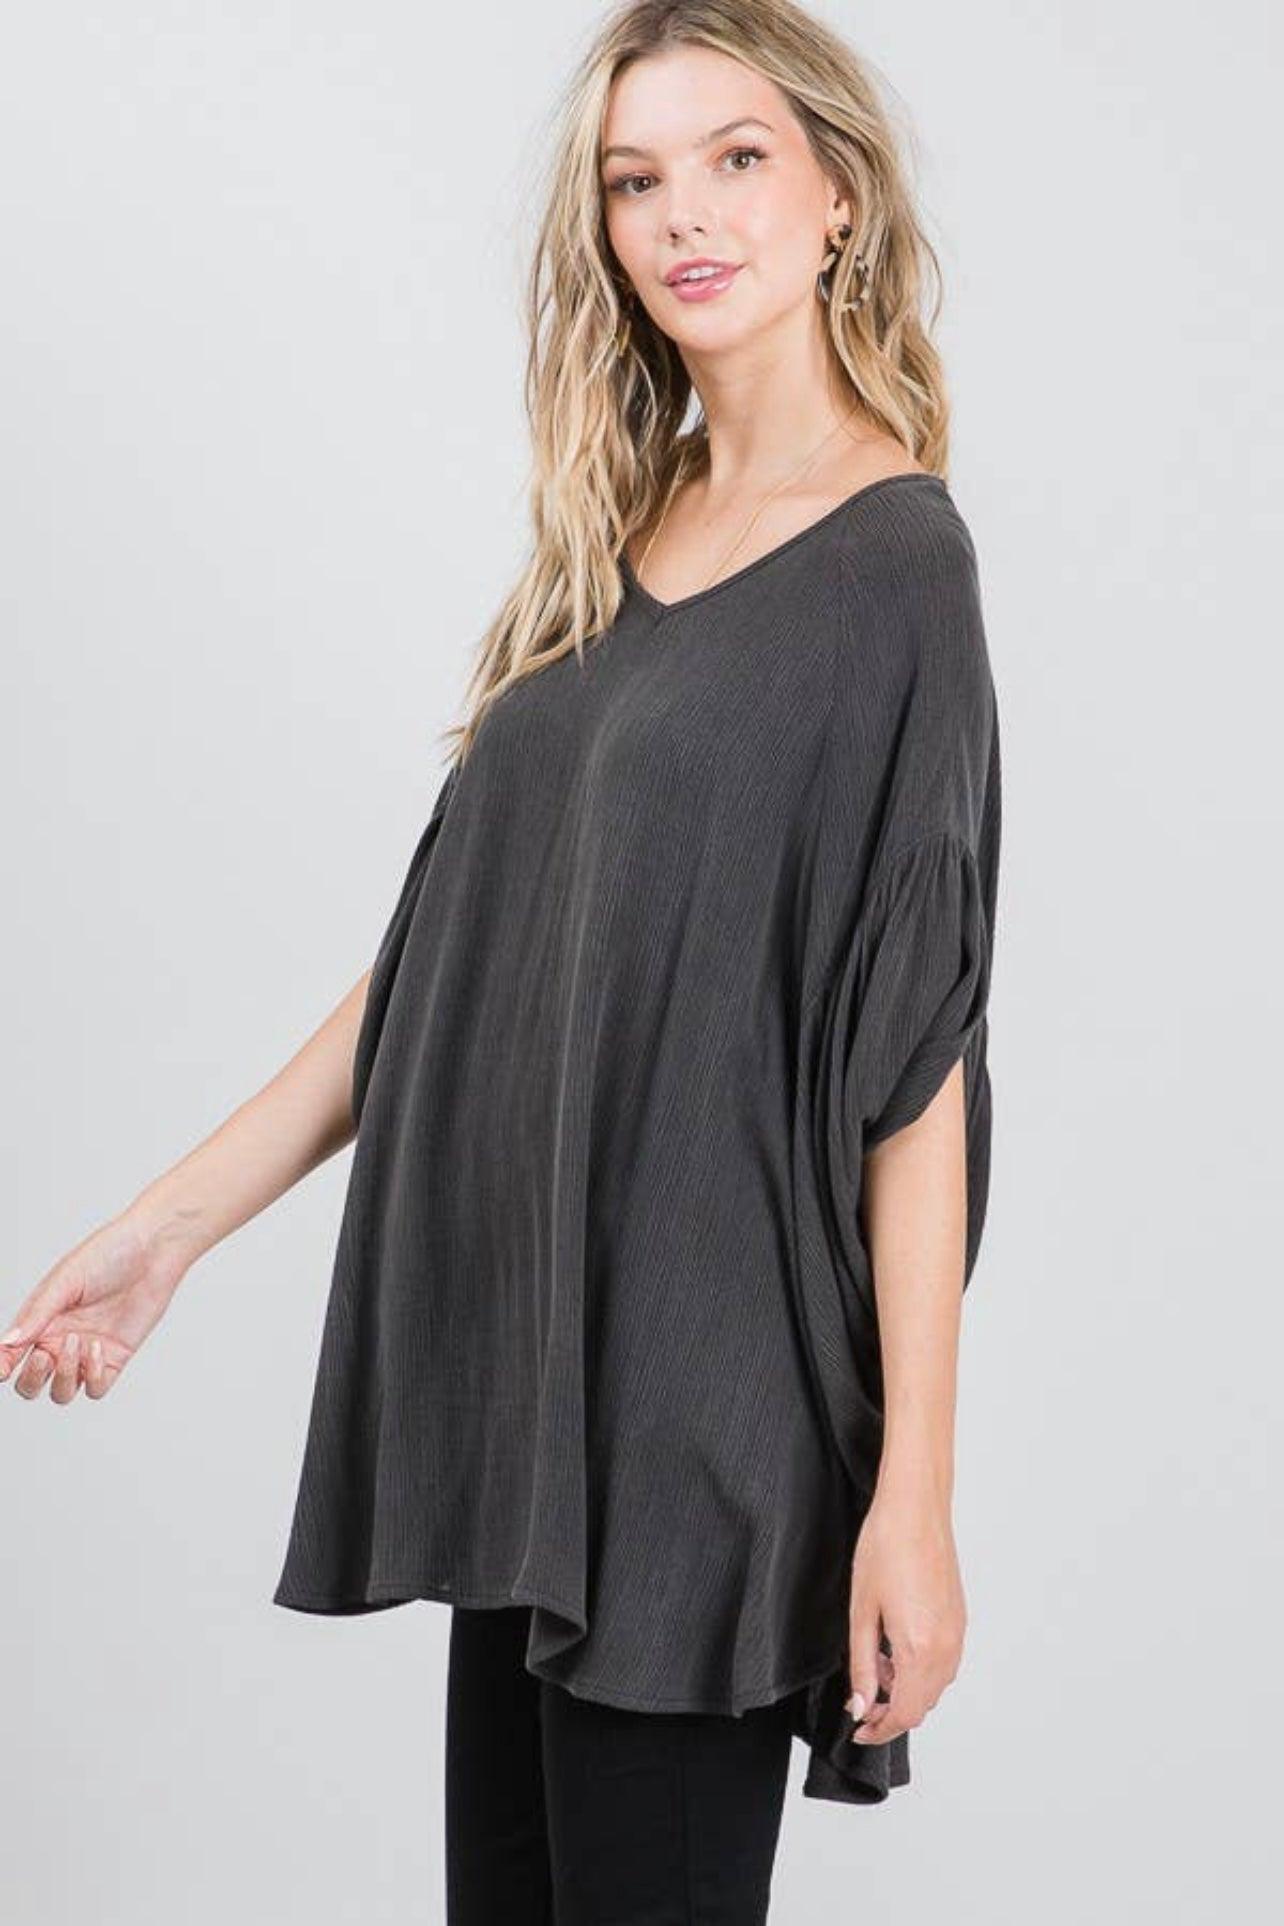 Go Your Own Way Tunic - Atomic Wildflower